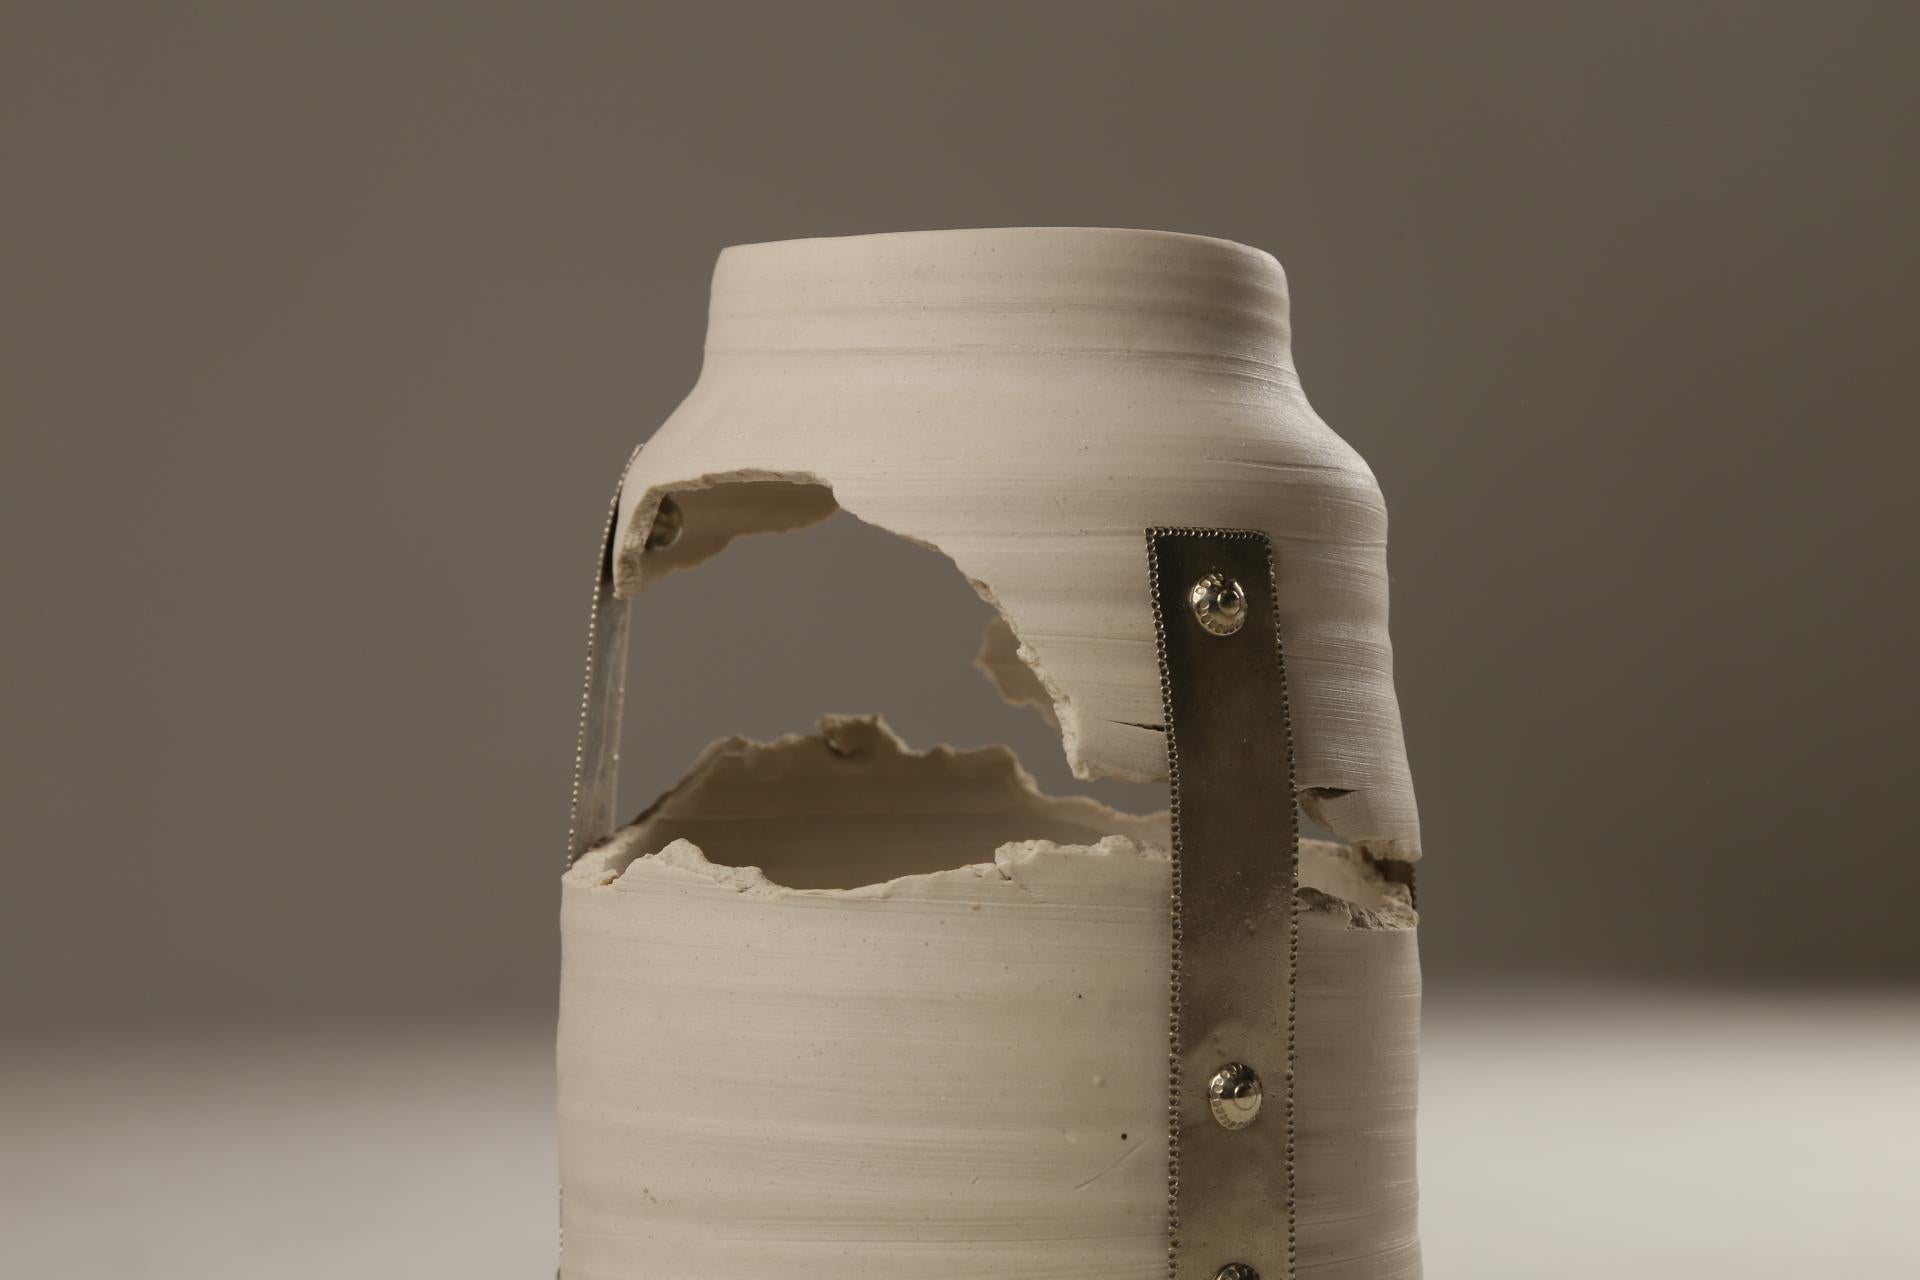 Made in collaboration with artist and ceramist Santiago Lena (Puerto Madryn, Chubut, Argentina). A series of unique vases, combining two very different and contrasting materials and processes, where each one fulfills a specific role, the